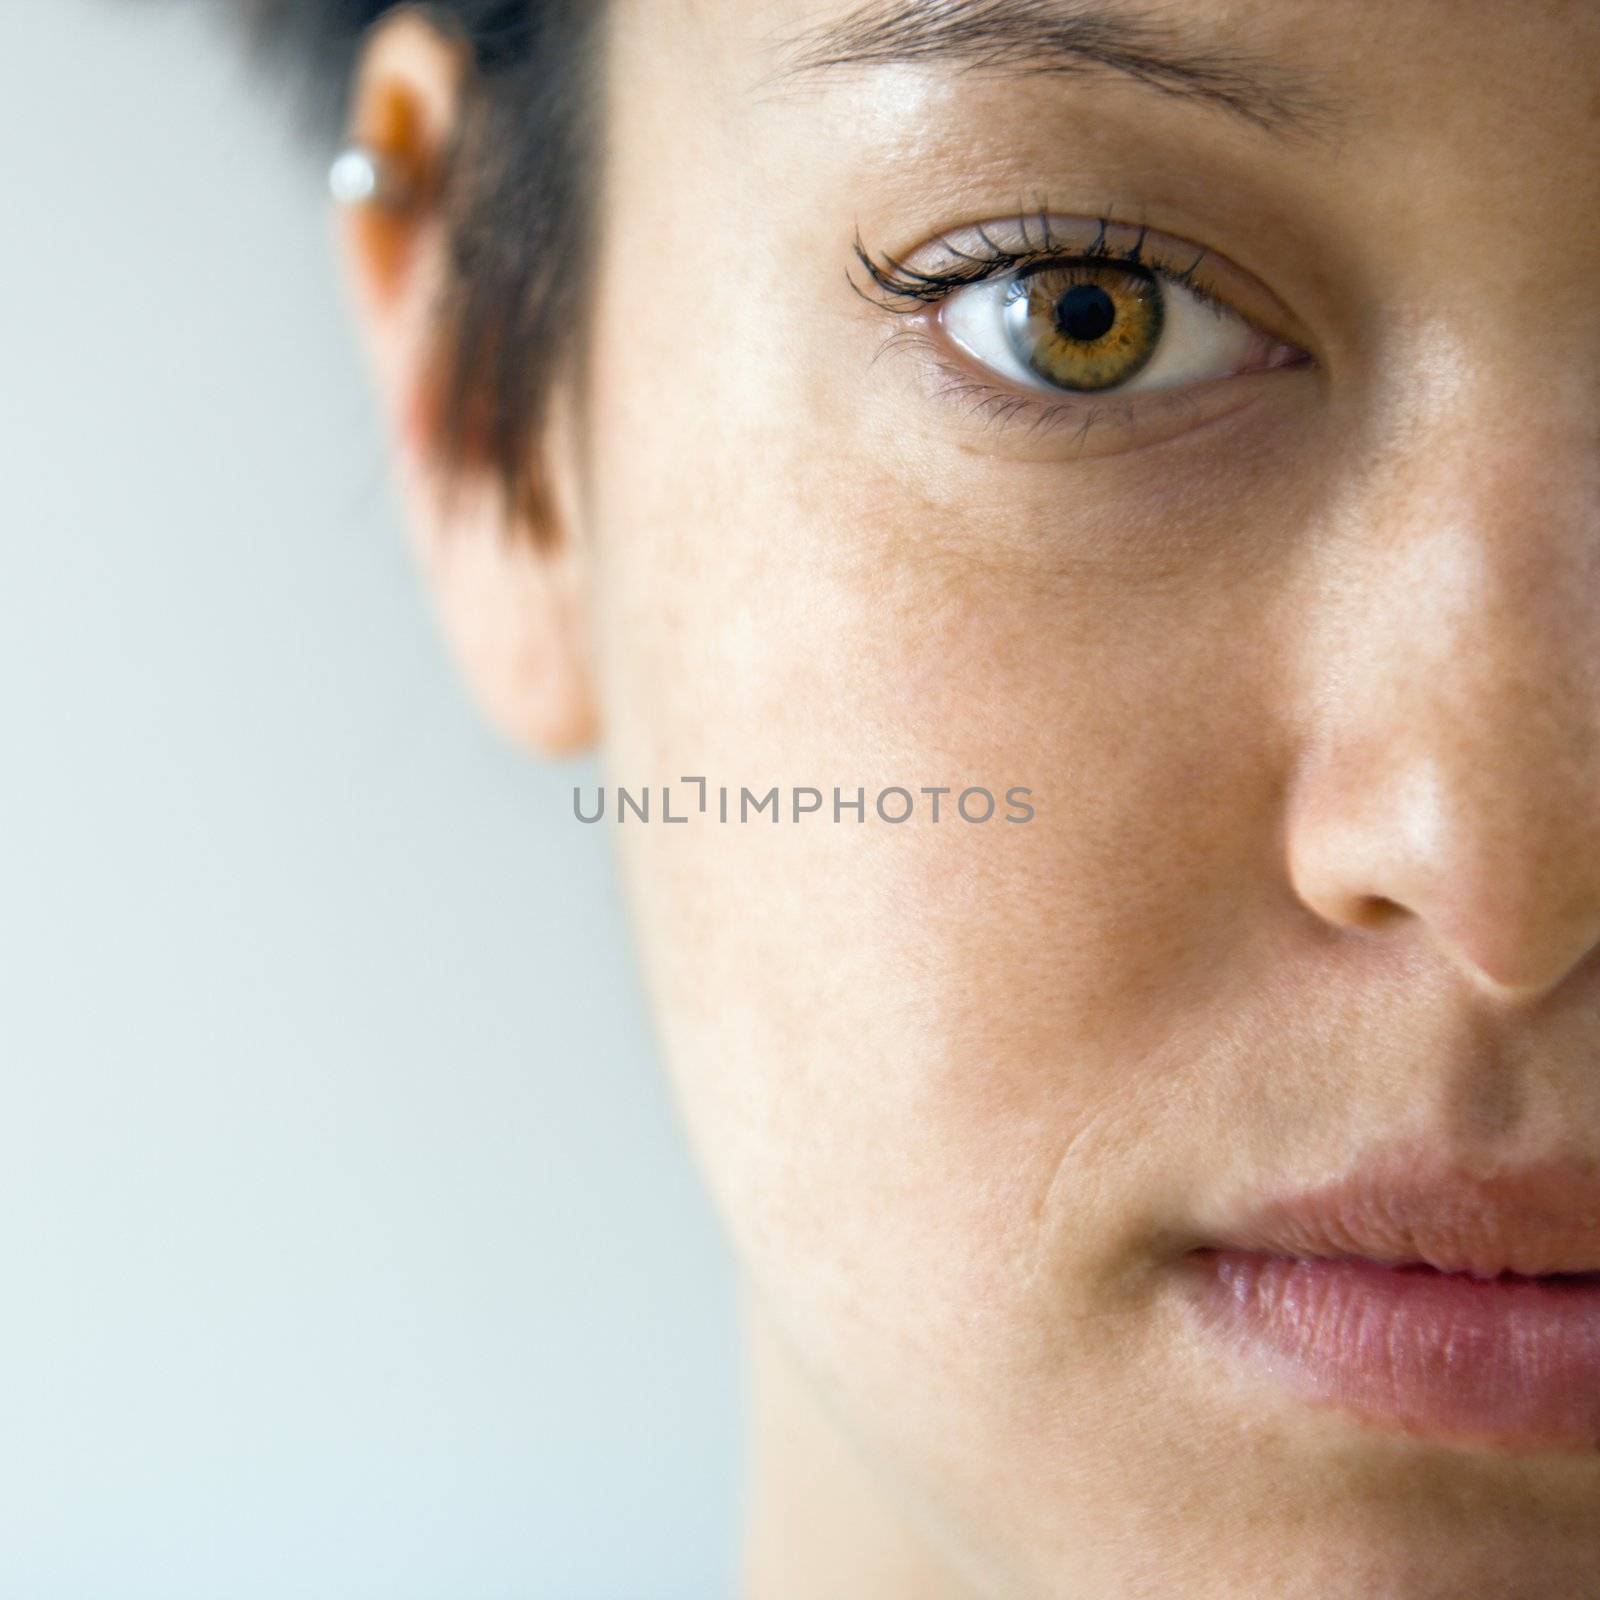 Close up portrait of young Caucasian woman.